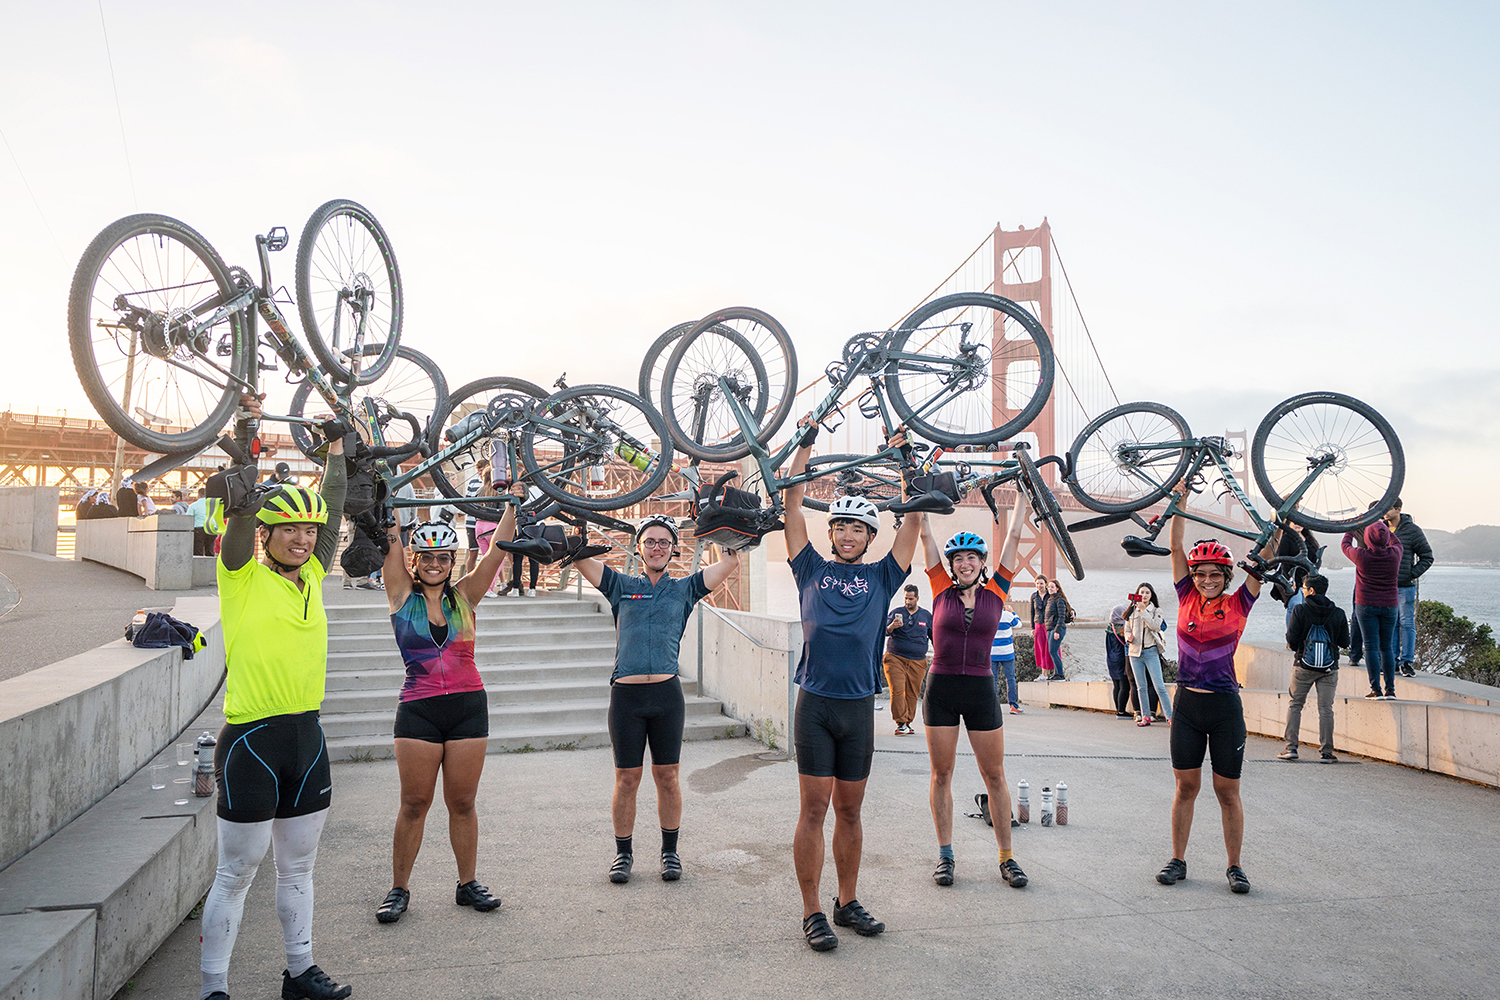 MIT Spokes cycles across the country to teach STEM classes